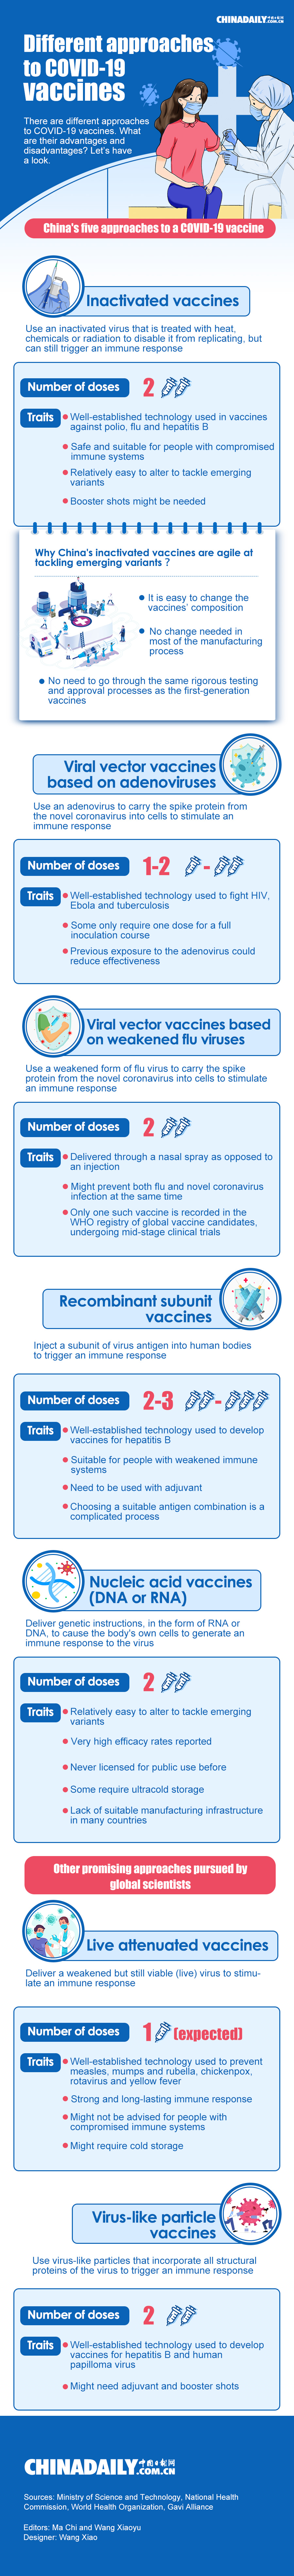 Different approaches to COVID-19 vaccines.jpeg